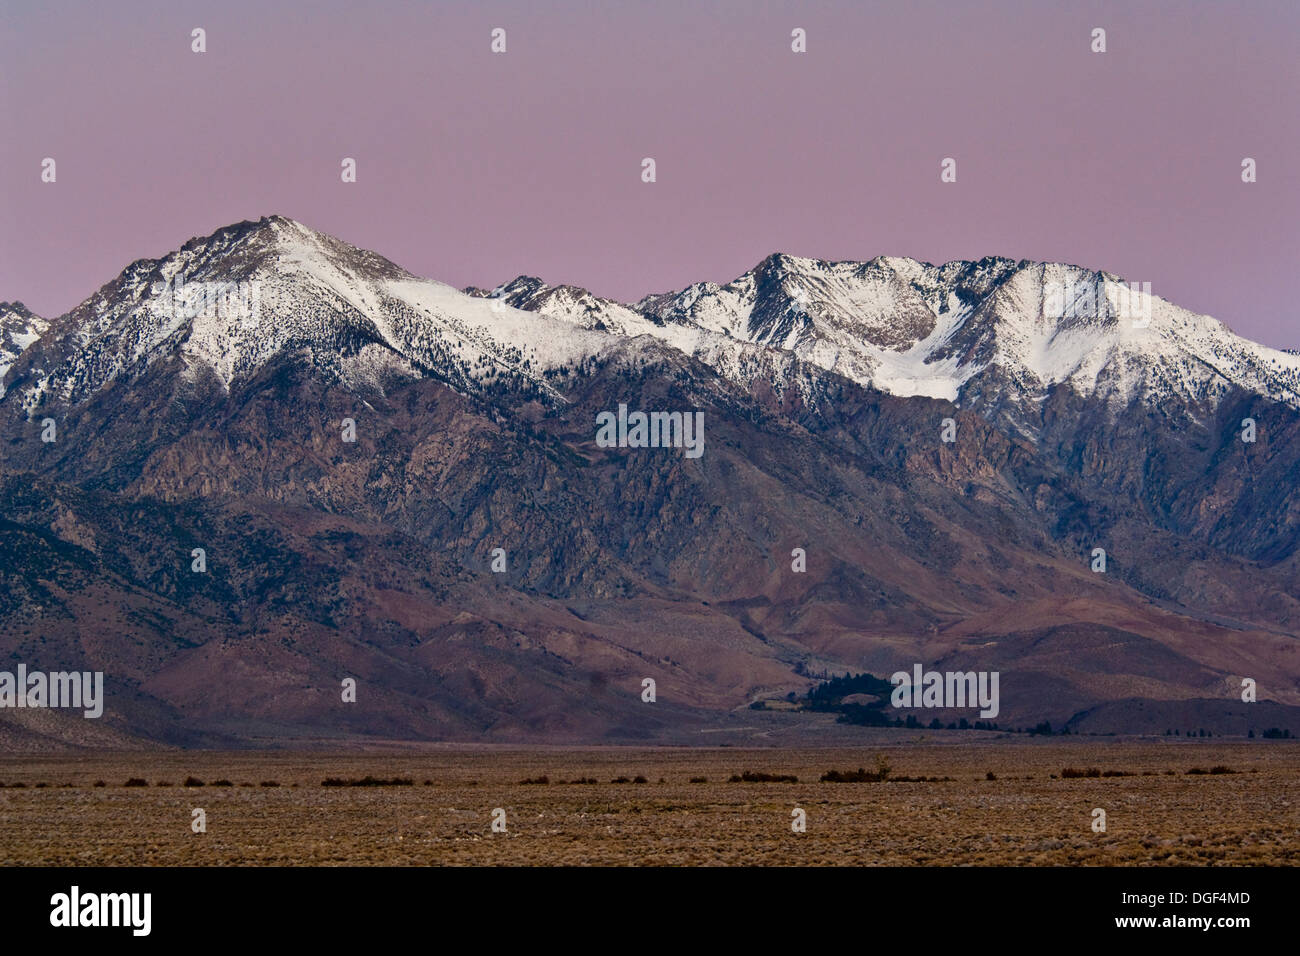 Dawn over the Eastern Sierra near Independence, California Stock Photo